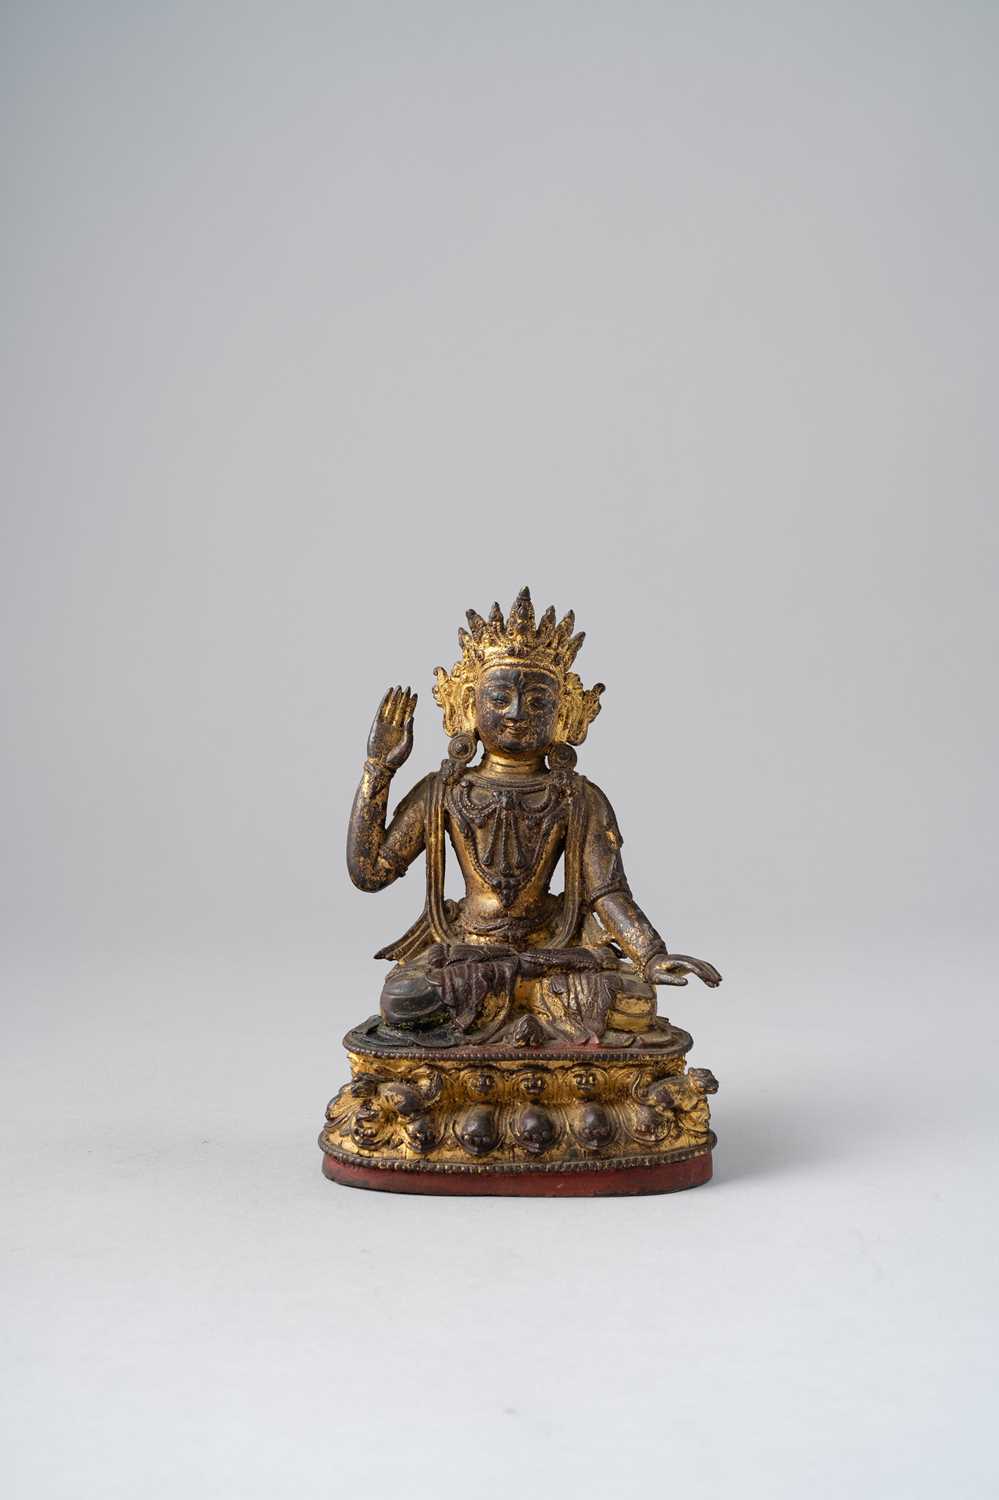 A CHINESE GILT-LACQUERED BRONZE FIGURE OF A BODHISATTVA LATE MING DYNASTY Seated in dhyanasana